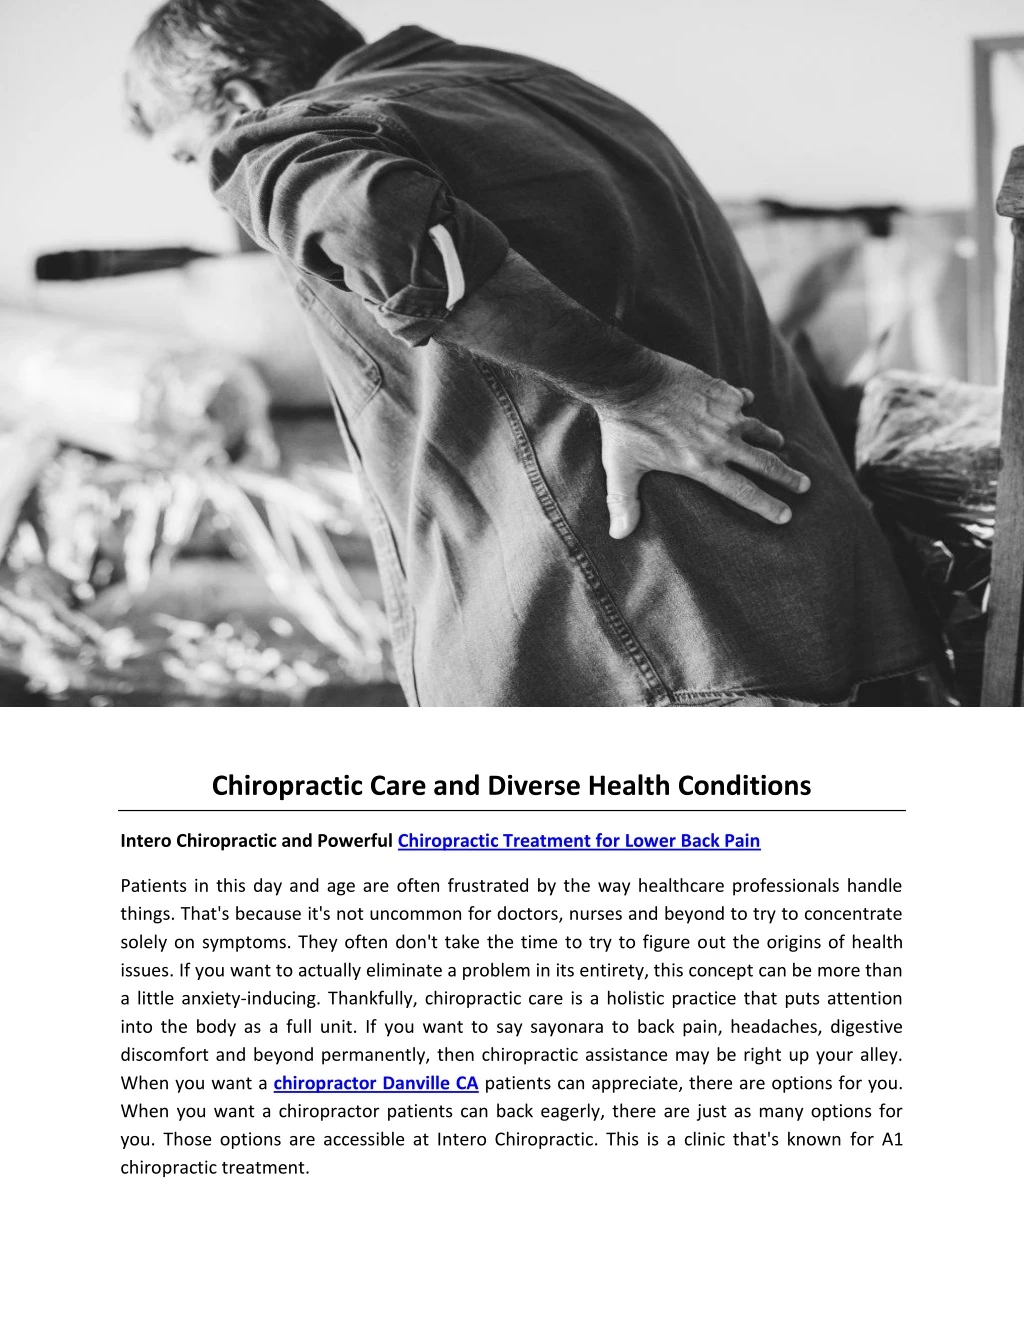 chiropractic care and diverse health conditions